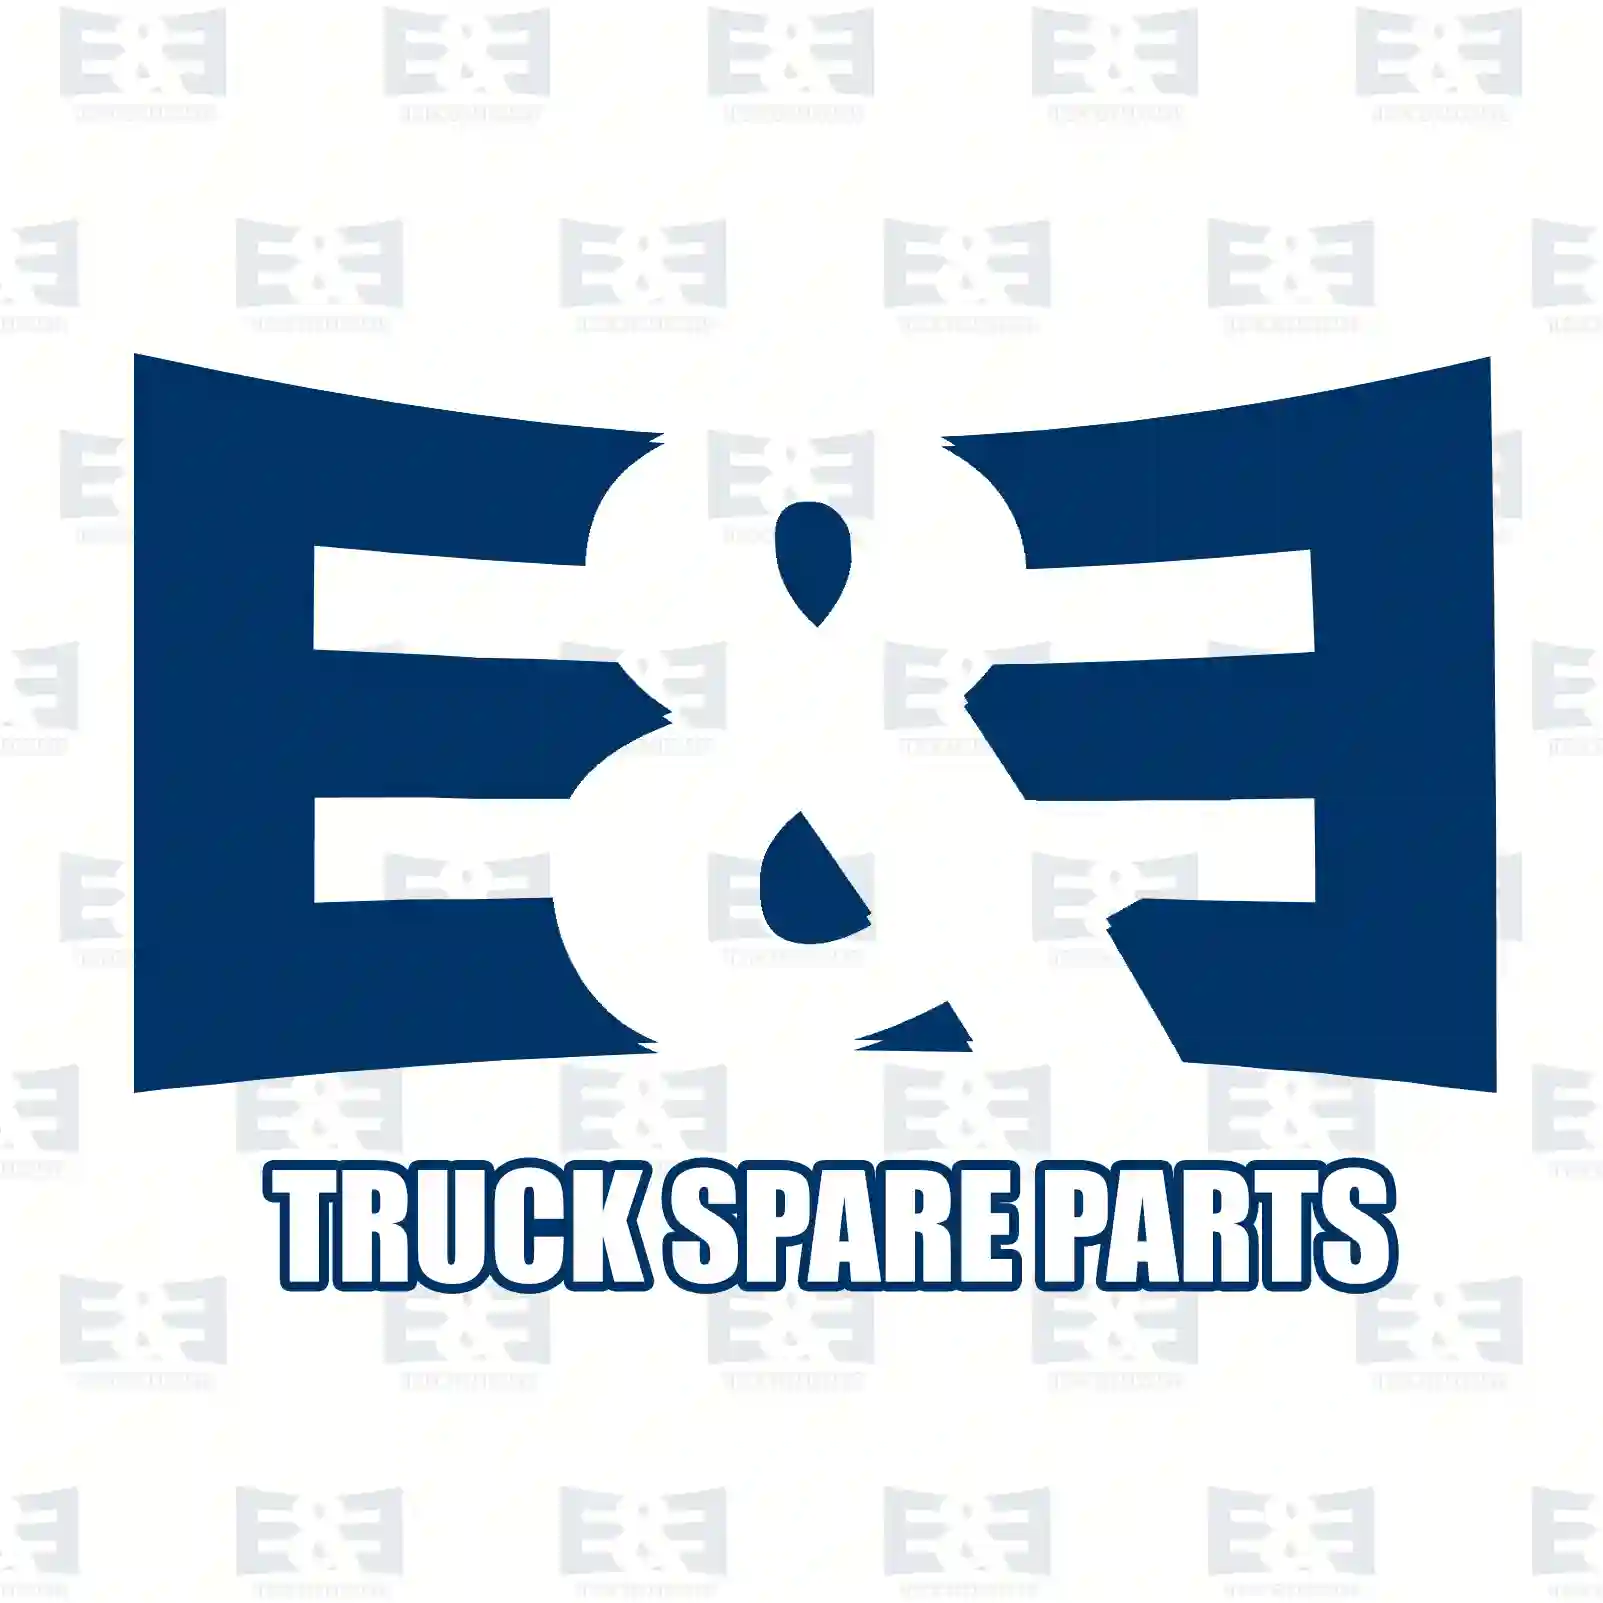  Gear, with bearing || E&E Truck Spare Parts | Truck Spare Parts, Auotomotive Spare Parts